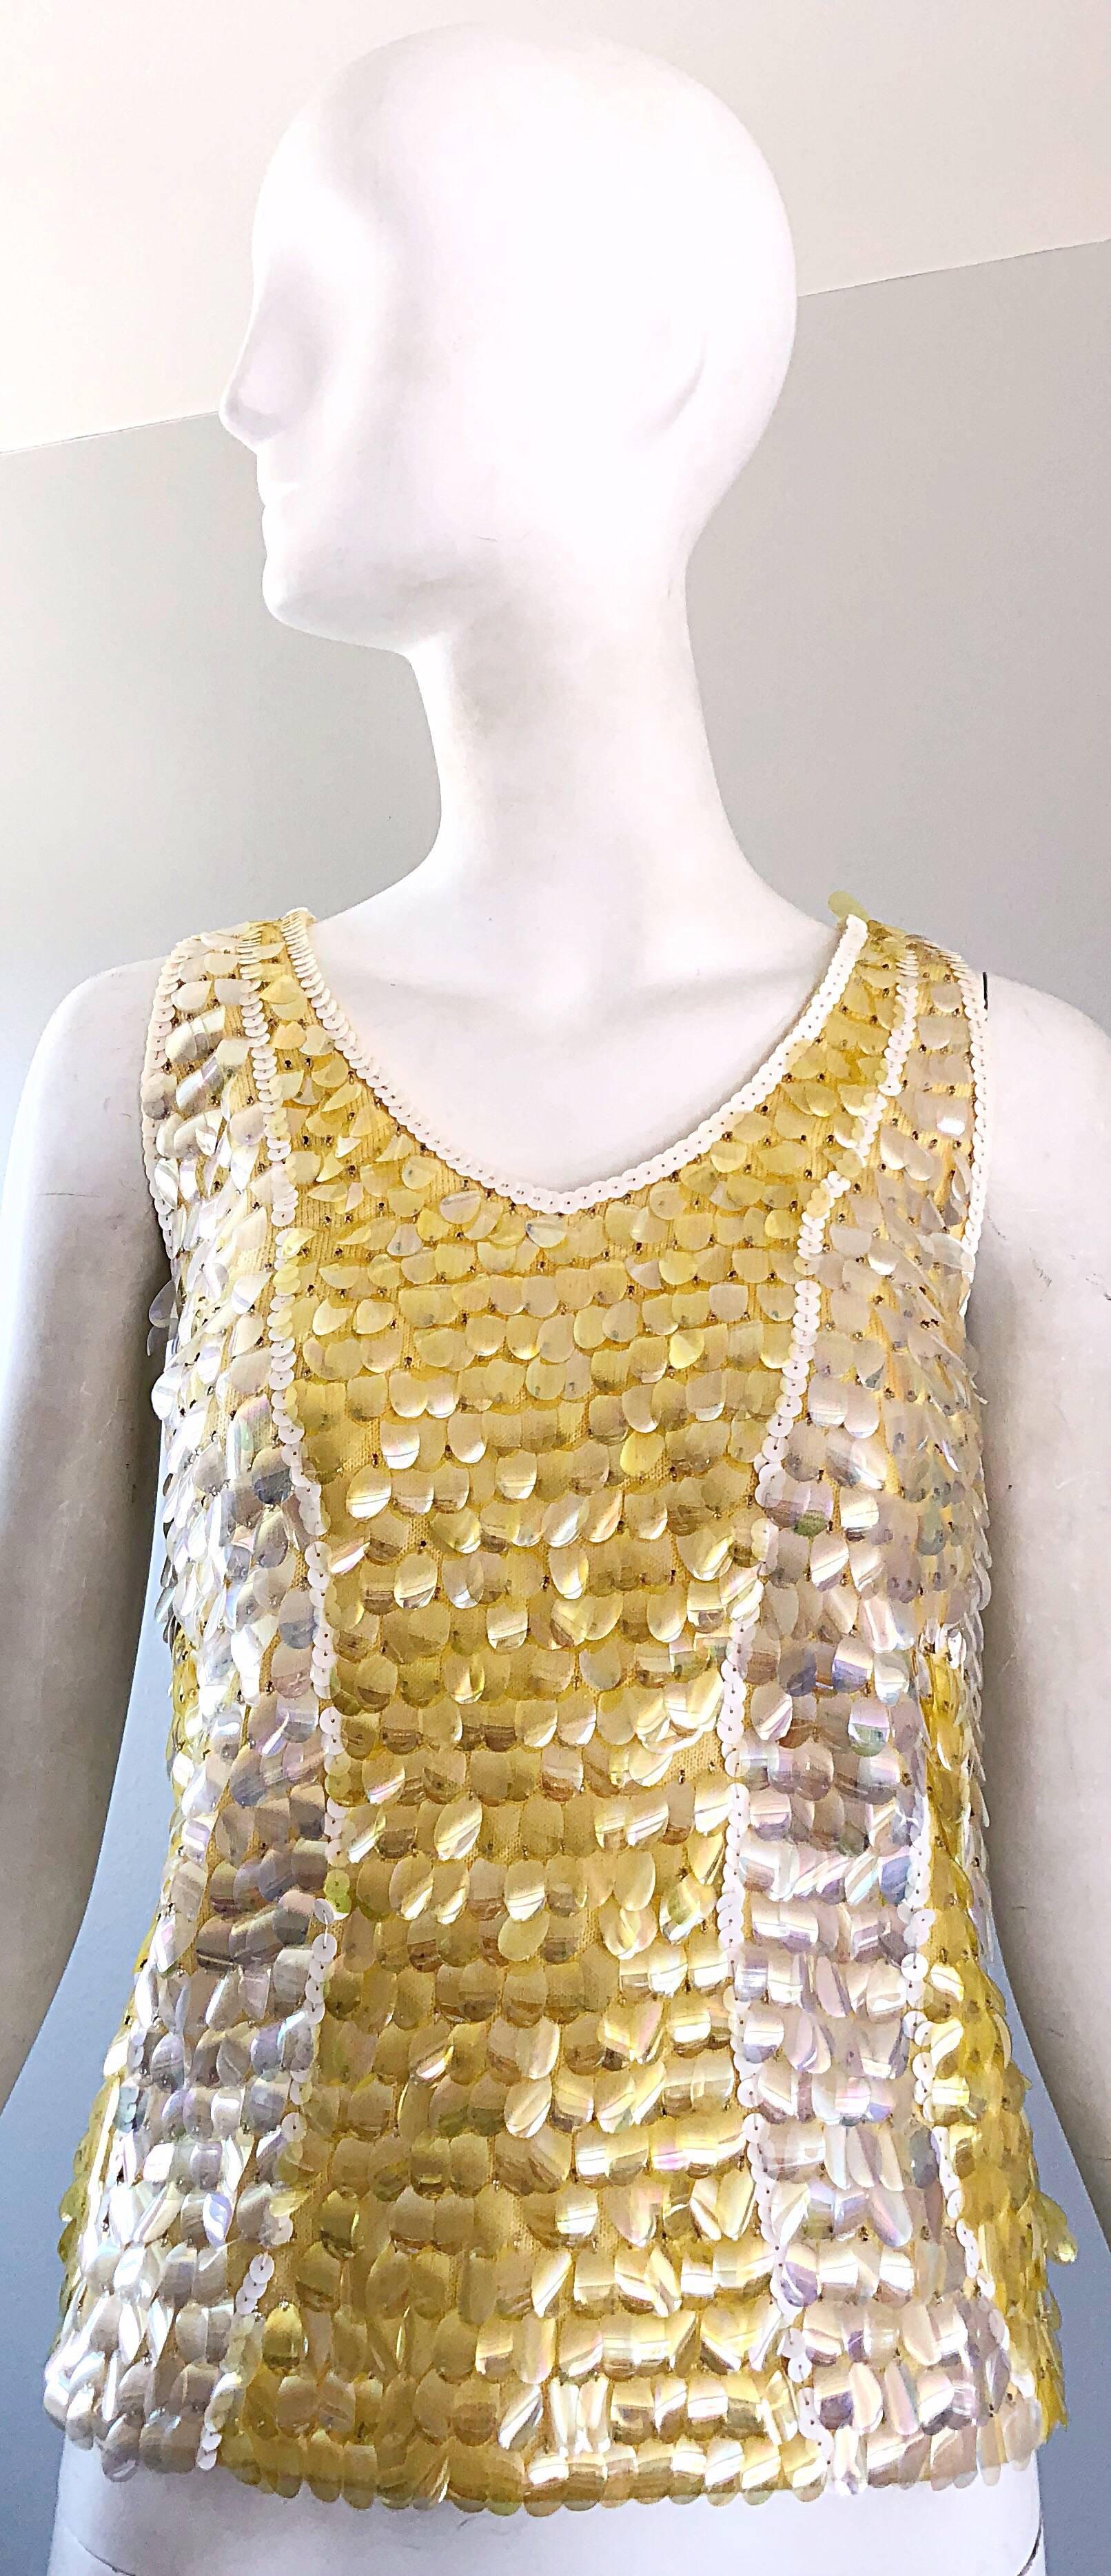 1960s Yellow + White + Clear Paillettes Sequined Lamb's Wool Sleeveless 60s Top For Sale 9